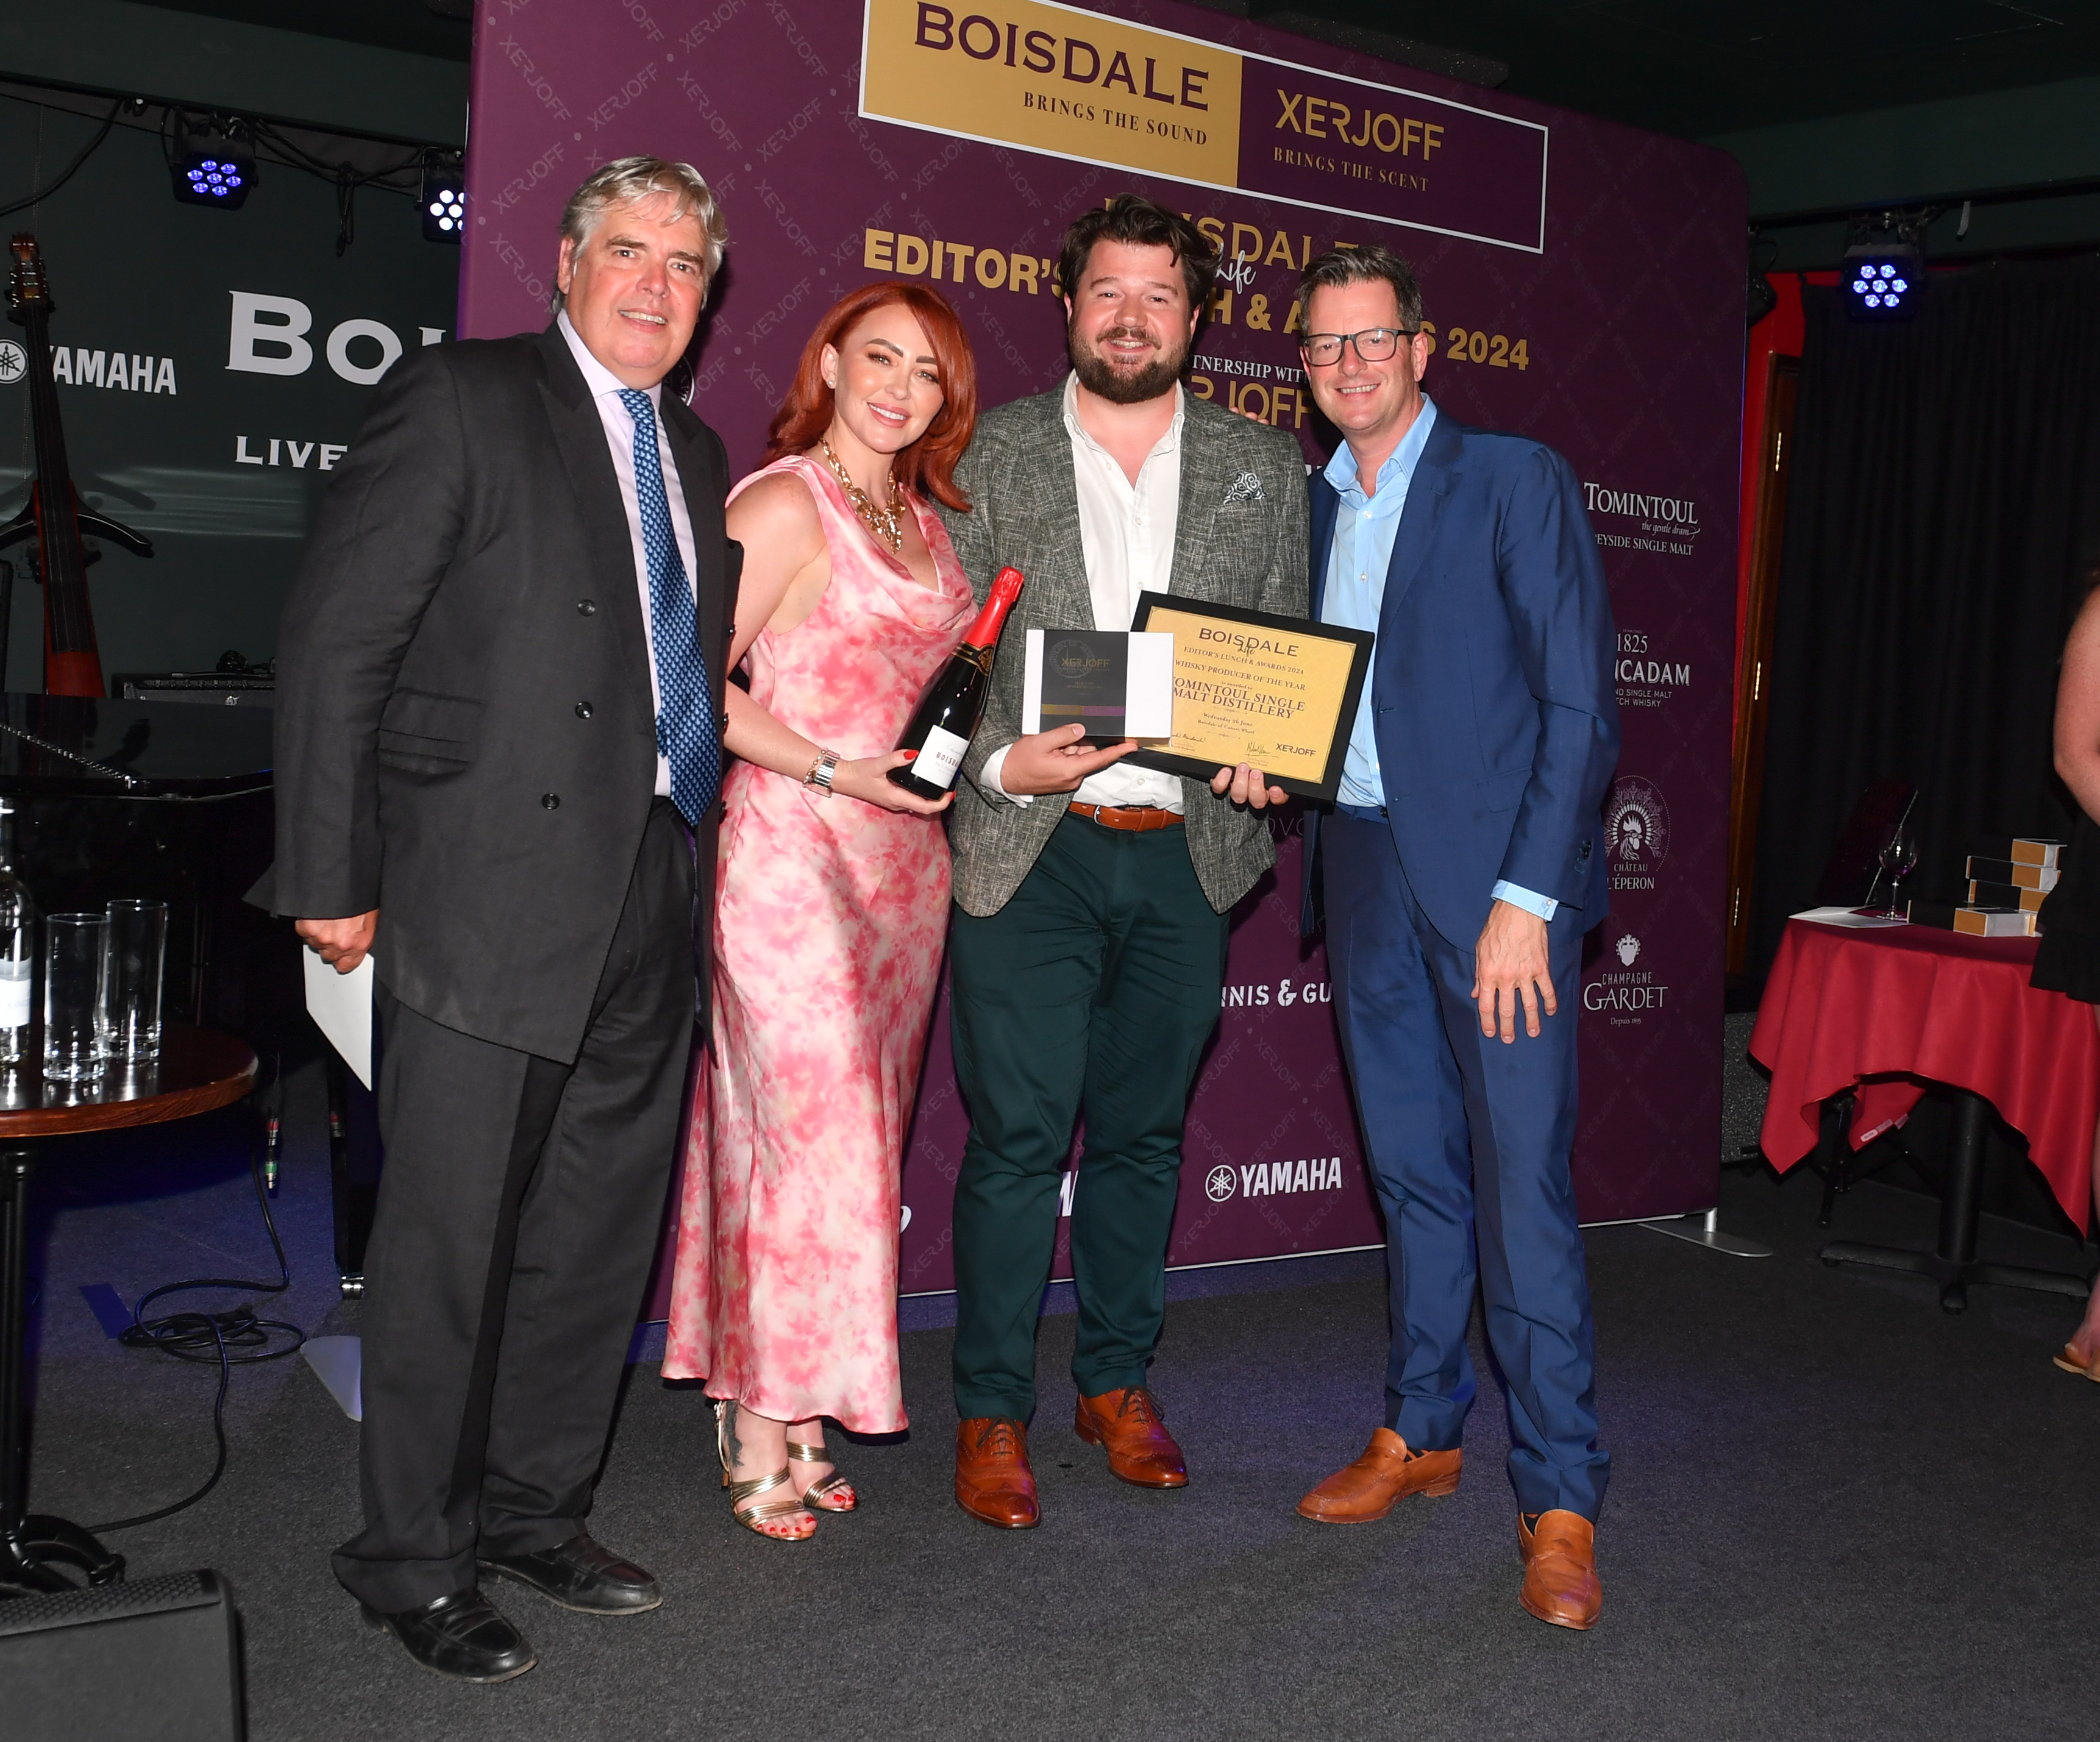 Tomintoul Distillery wins Boisdale Life Whisky Producer of the Year Award at the 2024 Boisdale Life Editor’s Lunch and Awards